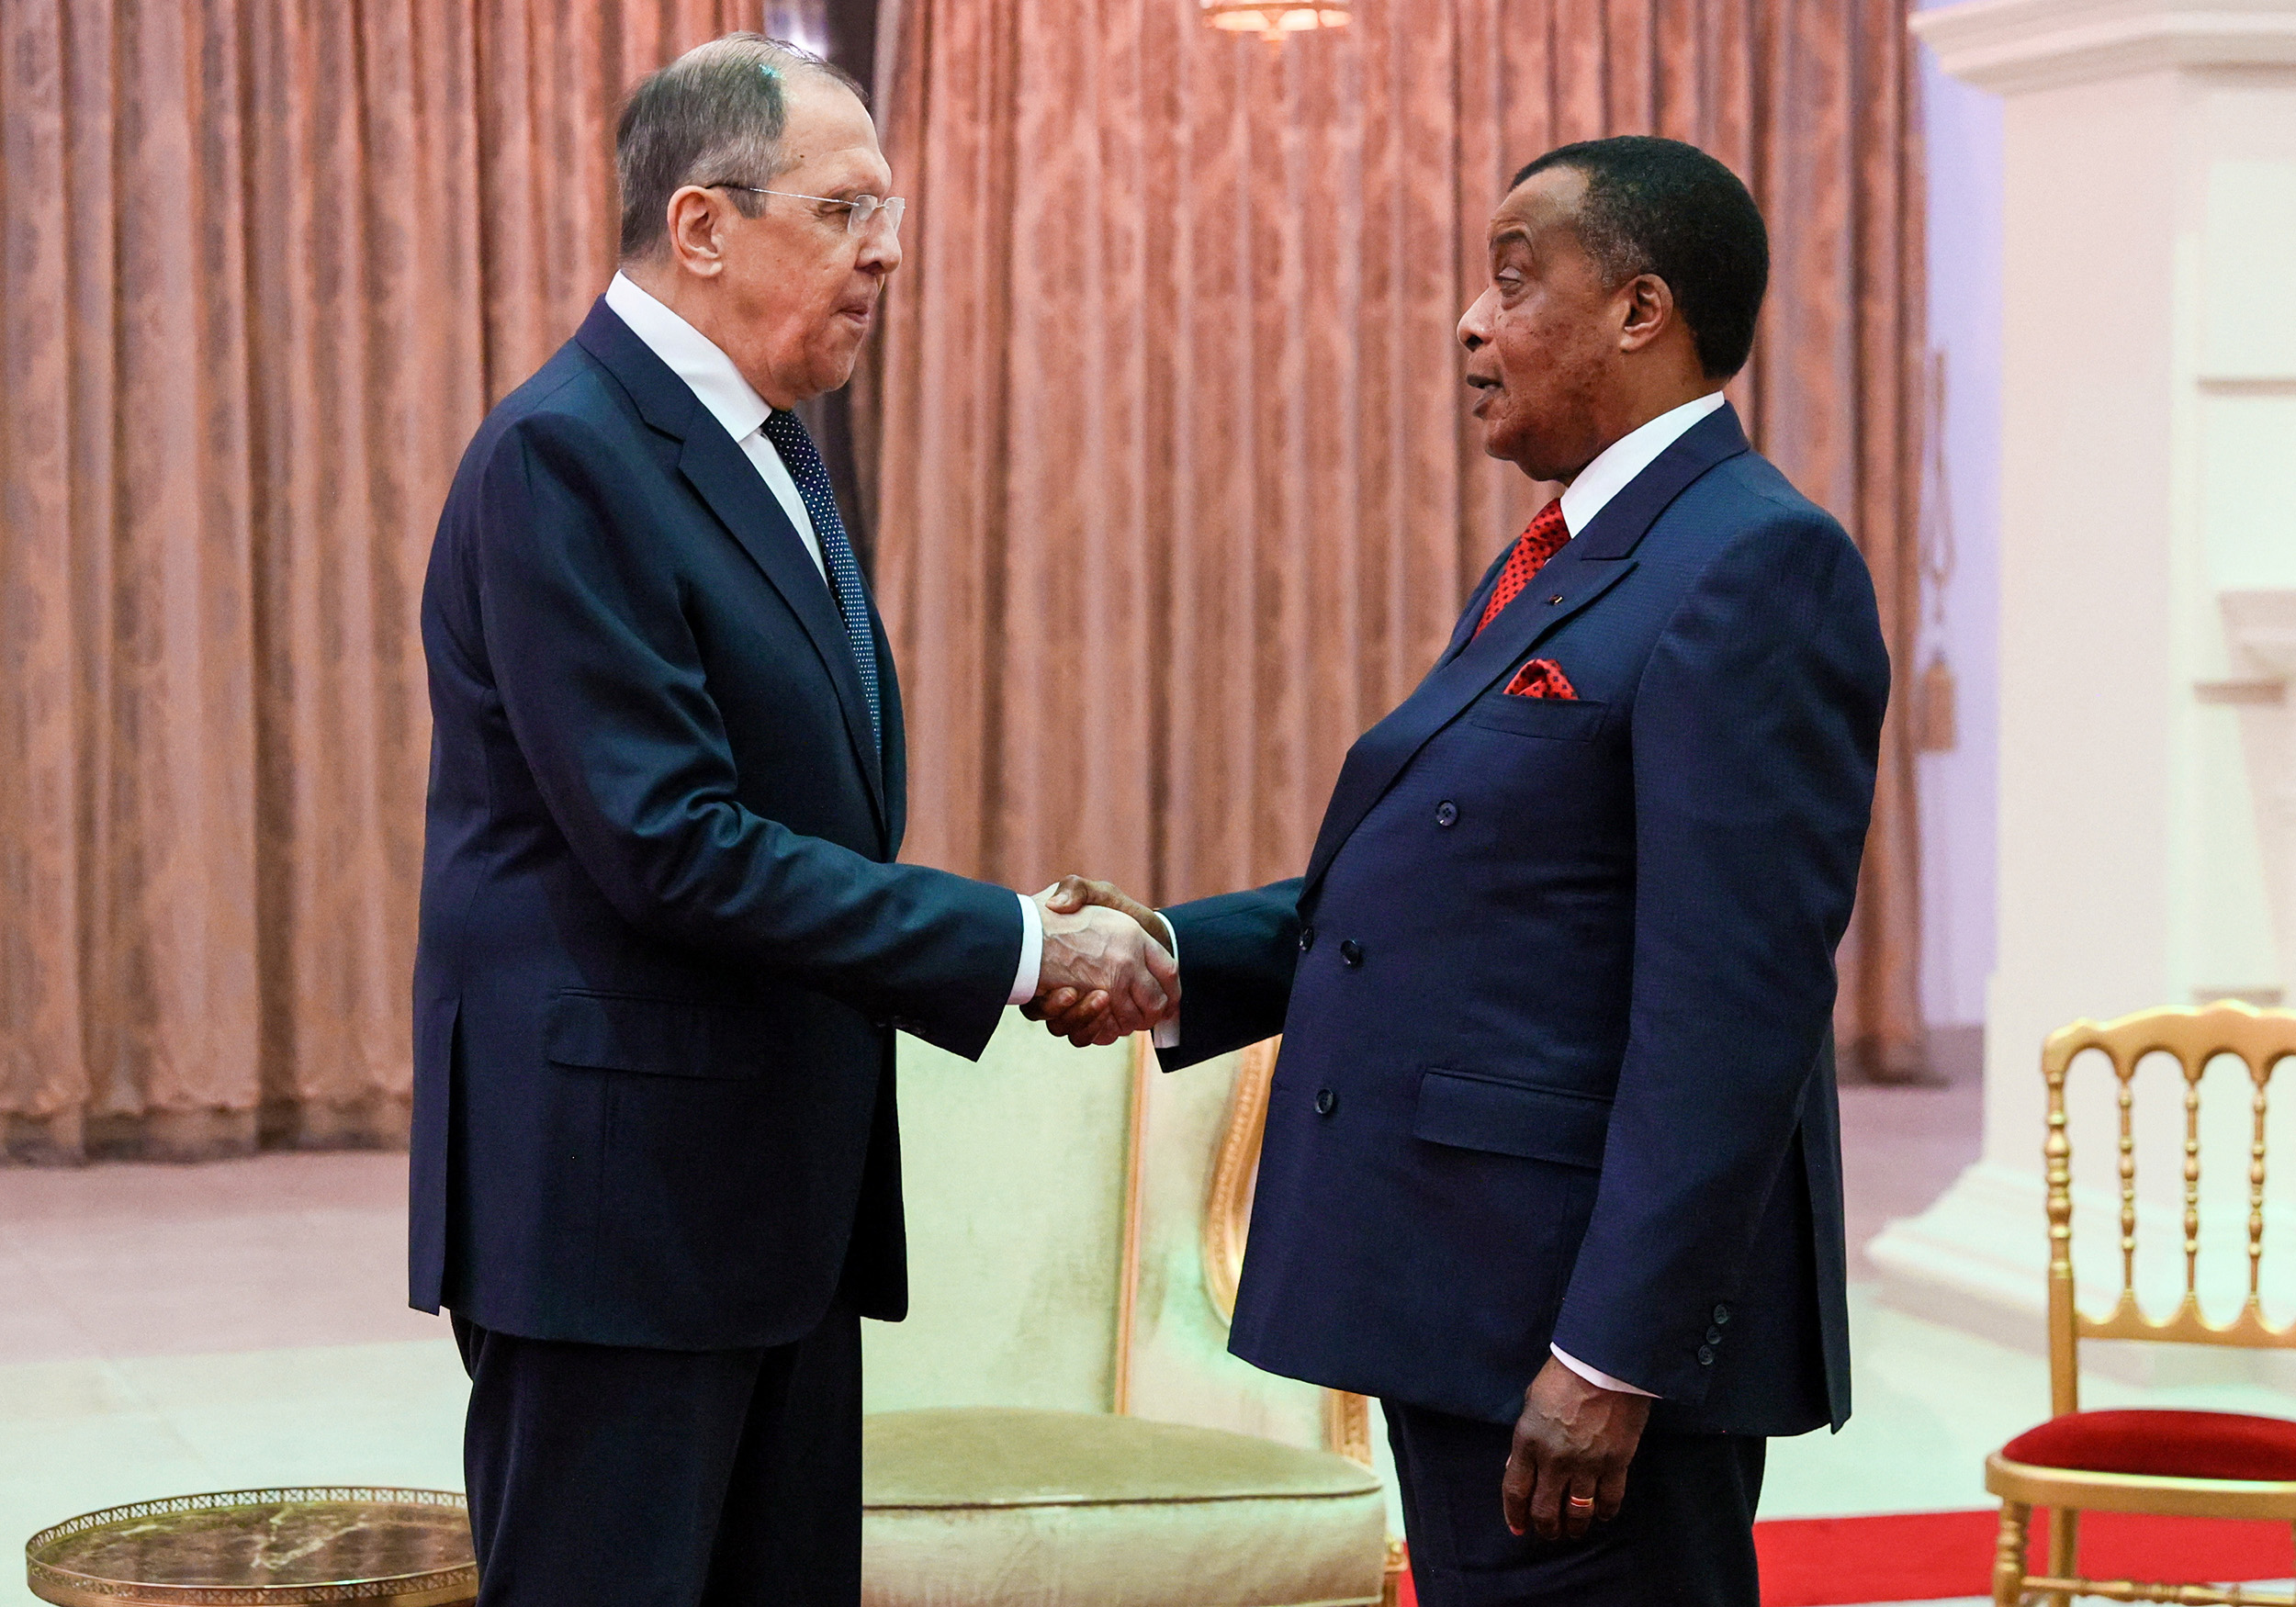 Republic of Congo's President Denis Sassou Nguesso, right, and Russia's Foreign Minister Sergey Lavrov, left, meet in Oyo, Republic of Congo, on July 25.